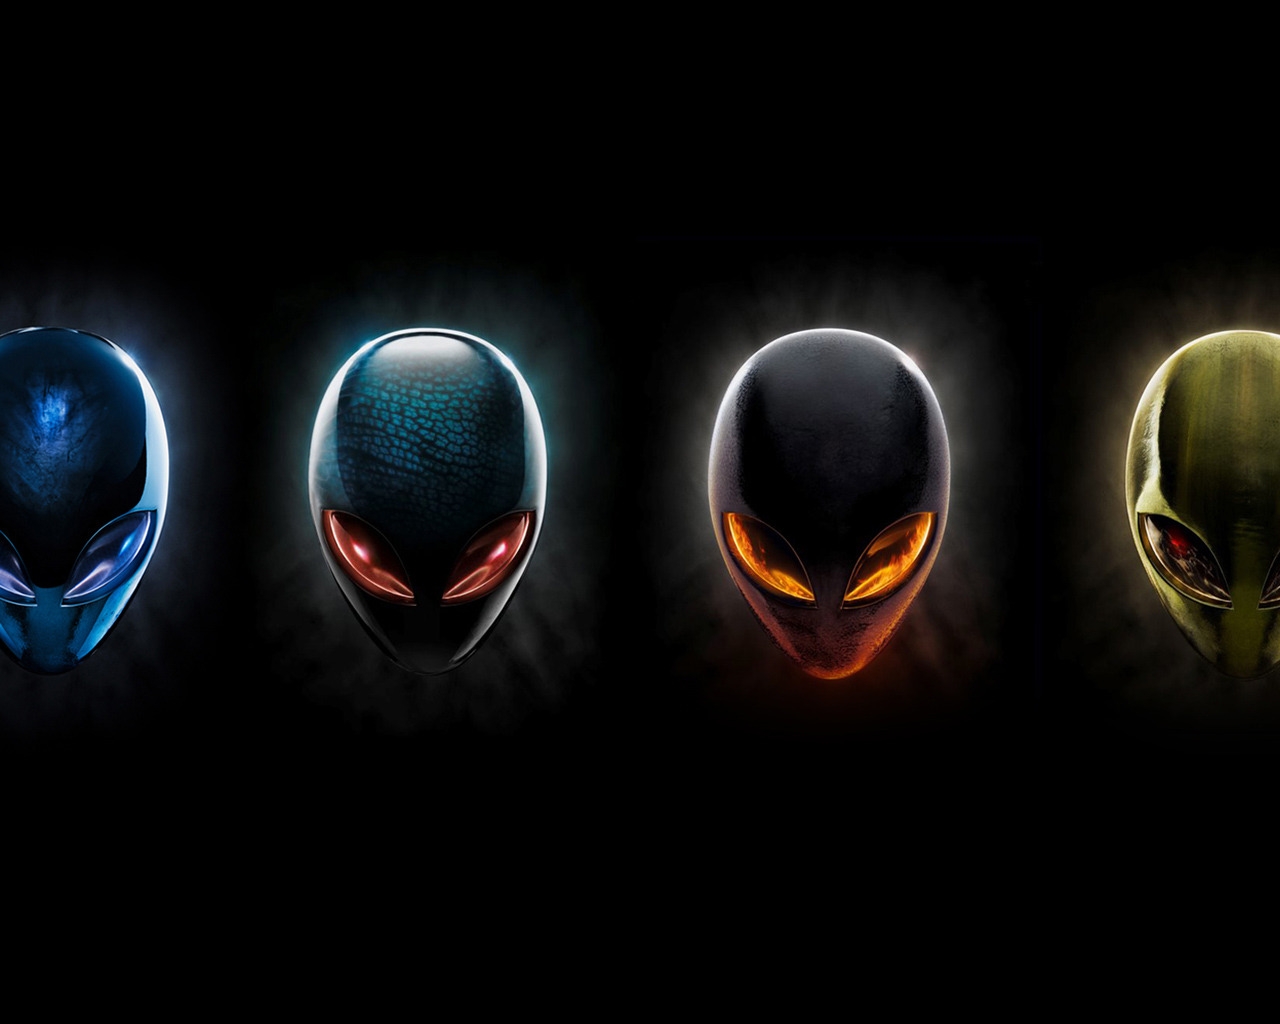 Alienware Logos for 1280 x 1024 resolution